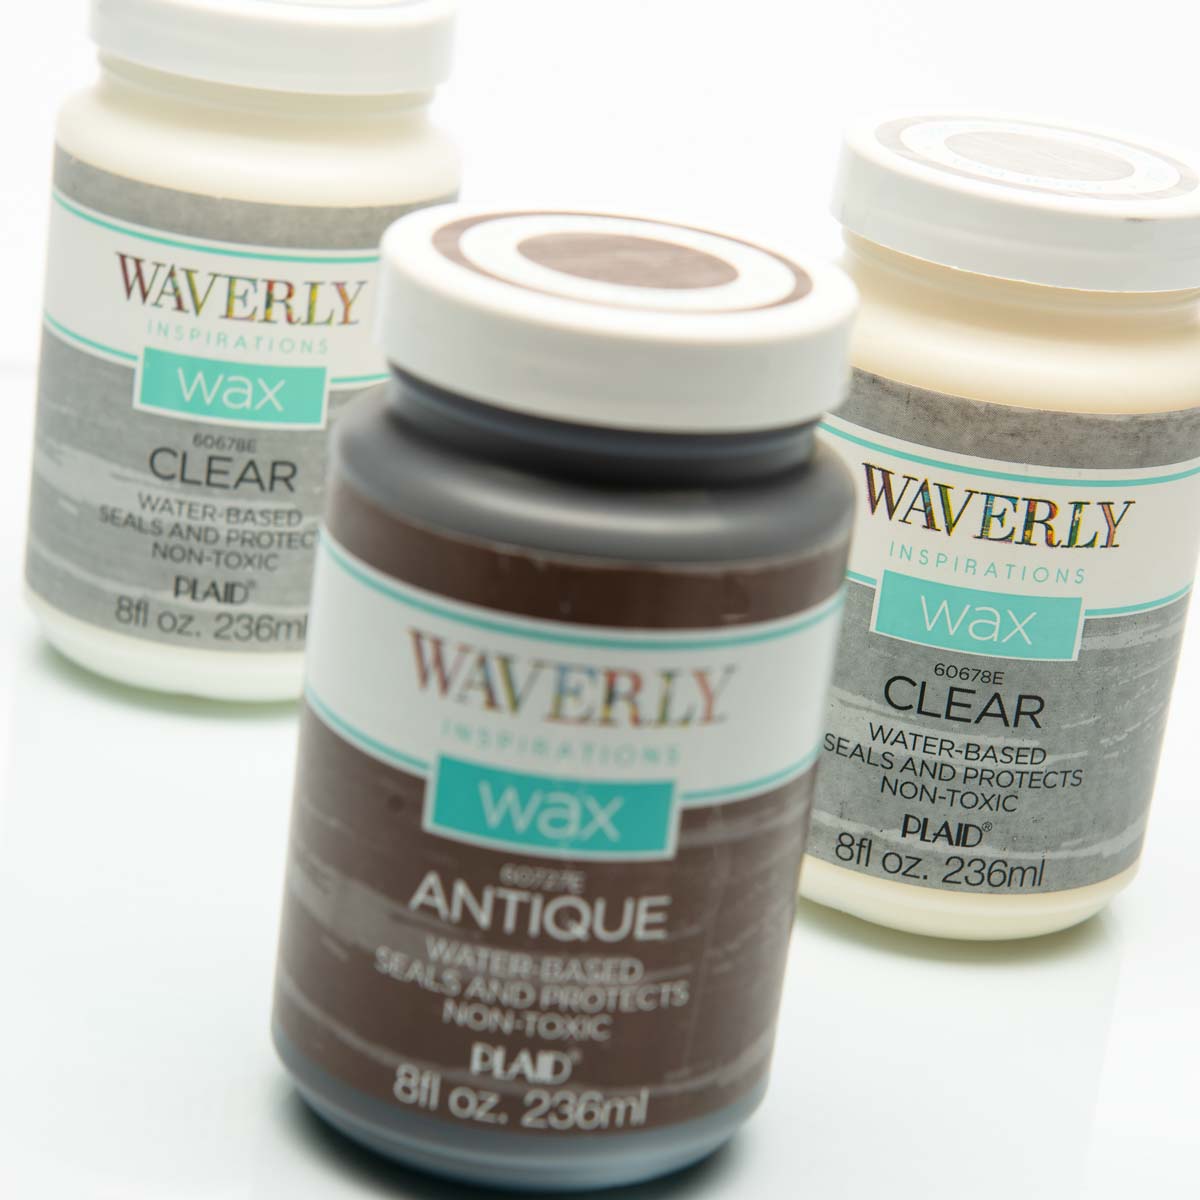 Waverly ® Inspirations Wax Set - Clear and Antique, 3 pc. - 13409